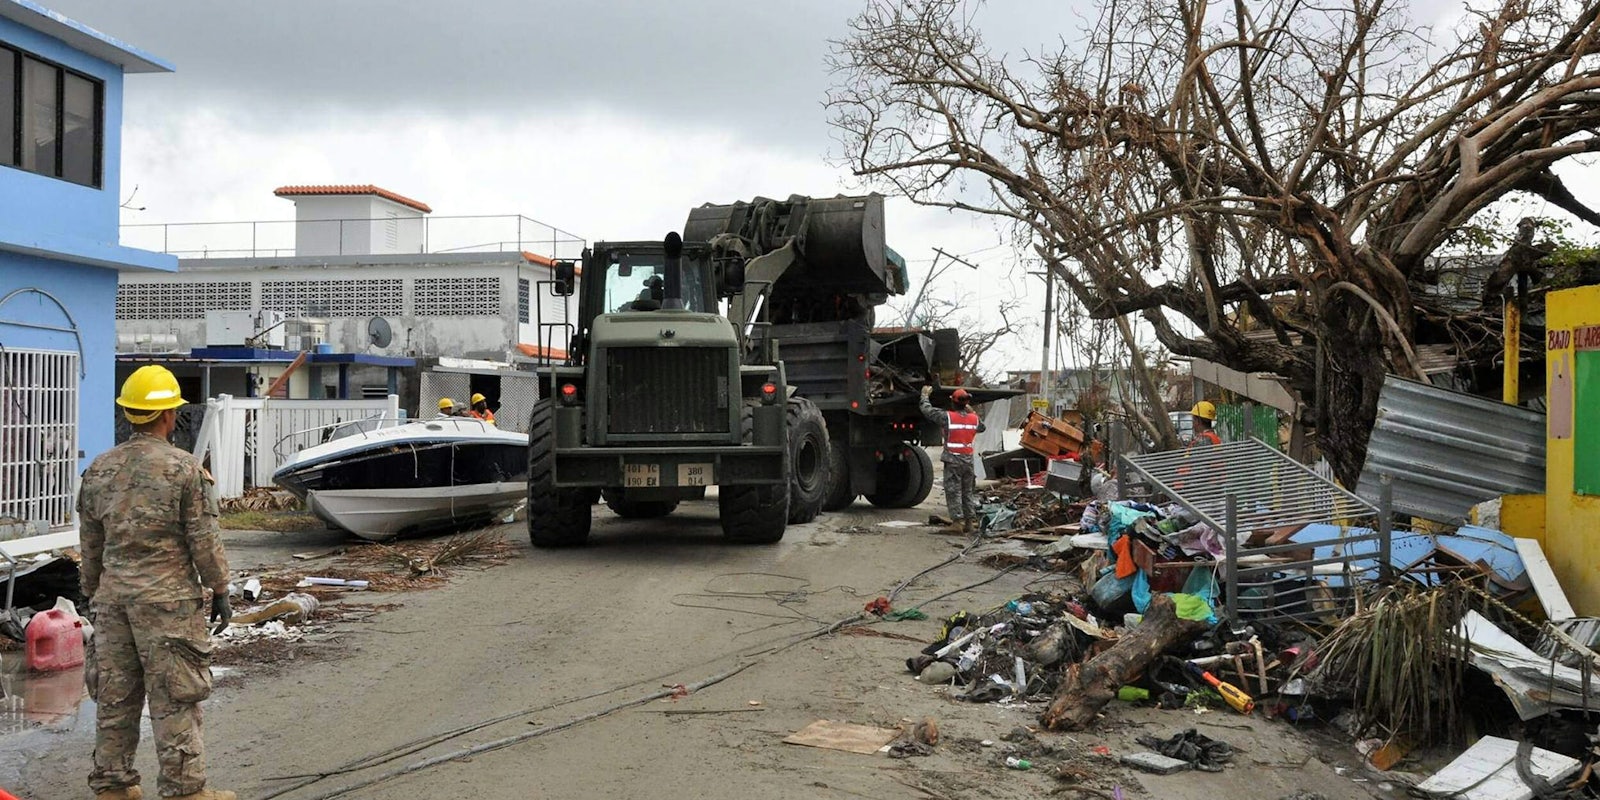 Puerto Rico National Guard Soldiers, along with volunteers of the Puerto Rico State Guard, work together to fulfill the road clearing mission at Punta Santiago in Humacao, PR, Sept. 27, 2017.